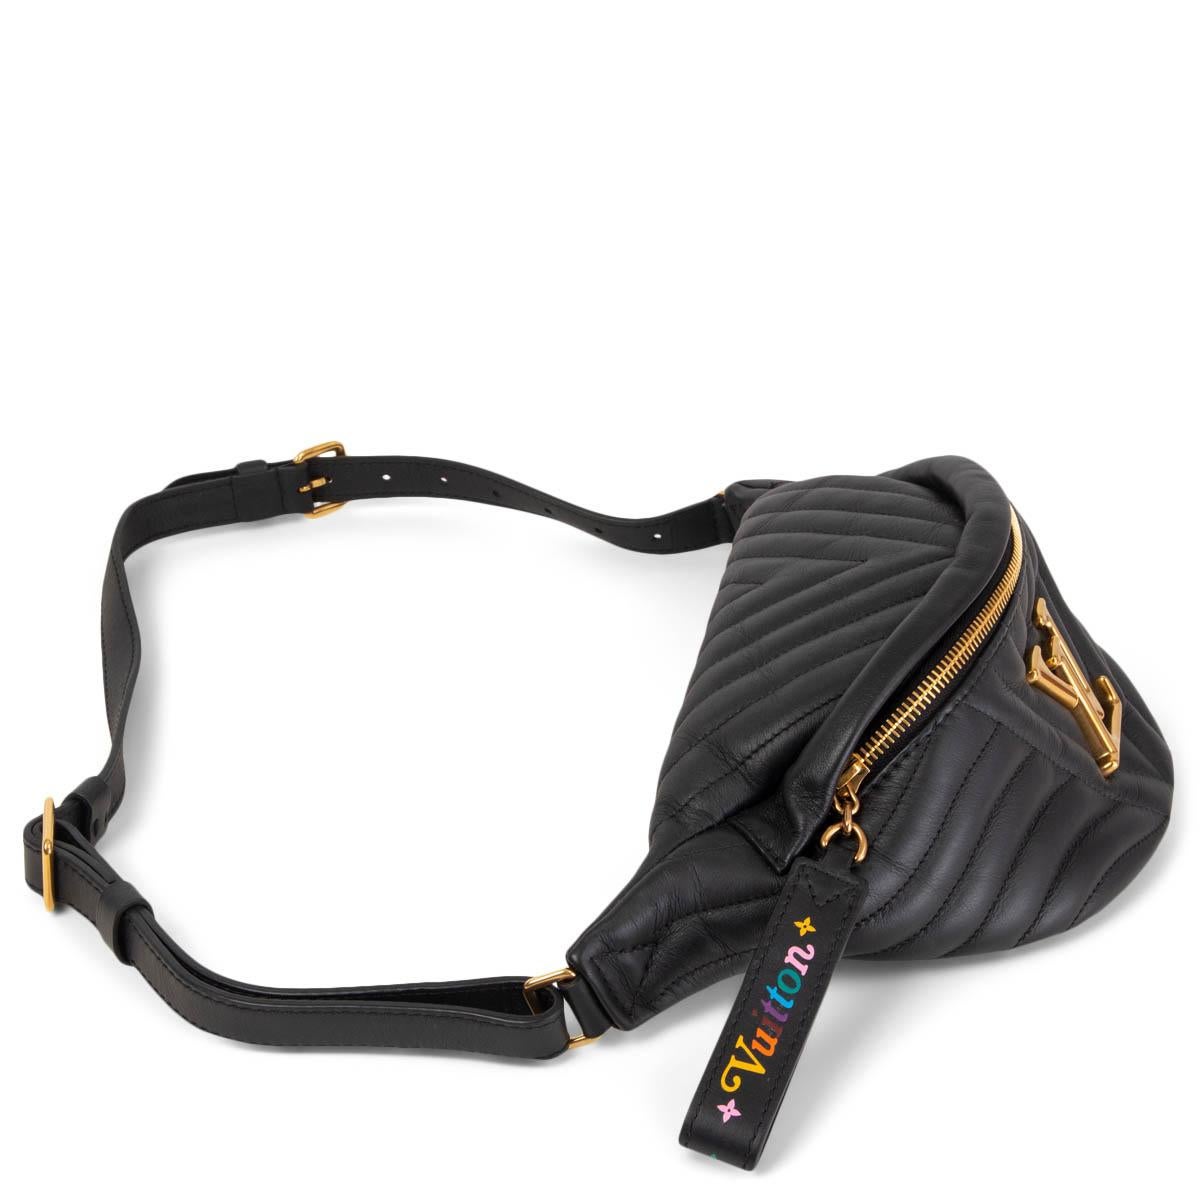 100% authentic Louis Vuitton New Wave Bumbag Belt Bag in black quilted leather featuring gold-tone hardware and rainbow logo zipper pull. Opens with a zipper on top and is lined in black canvas. Has been carried and is in excellent condition. Comes